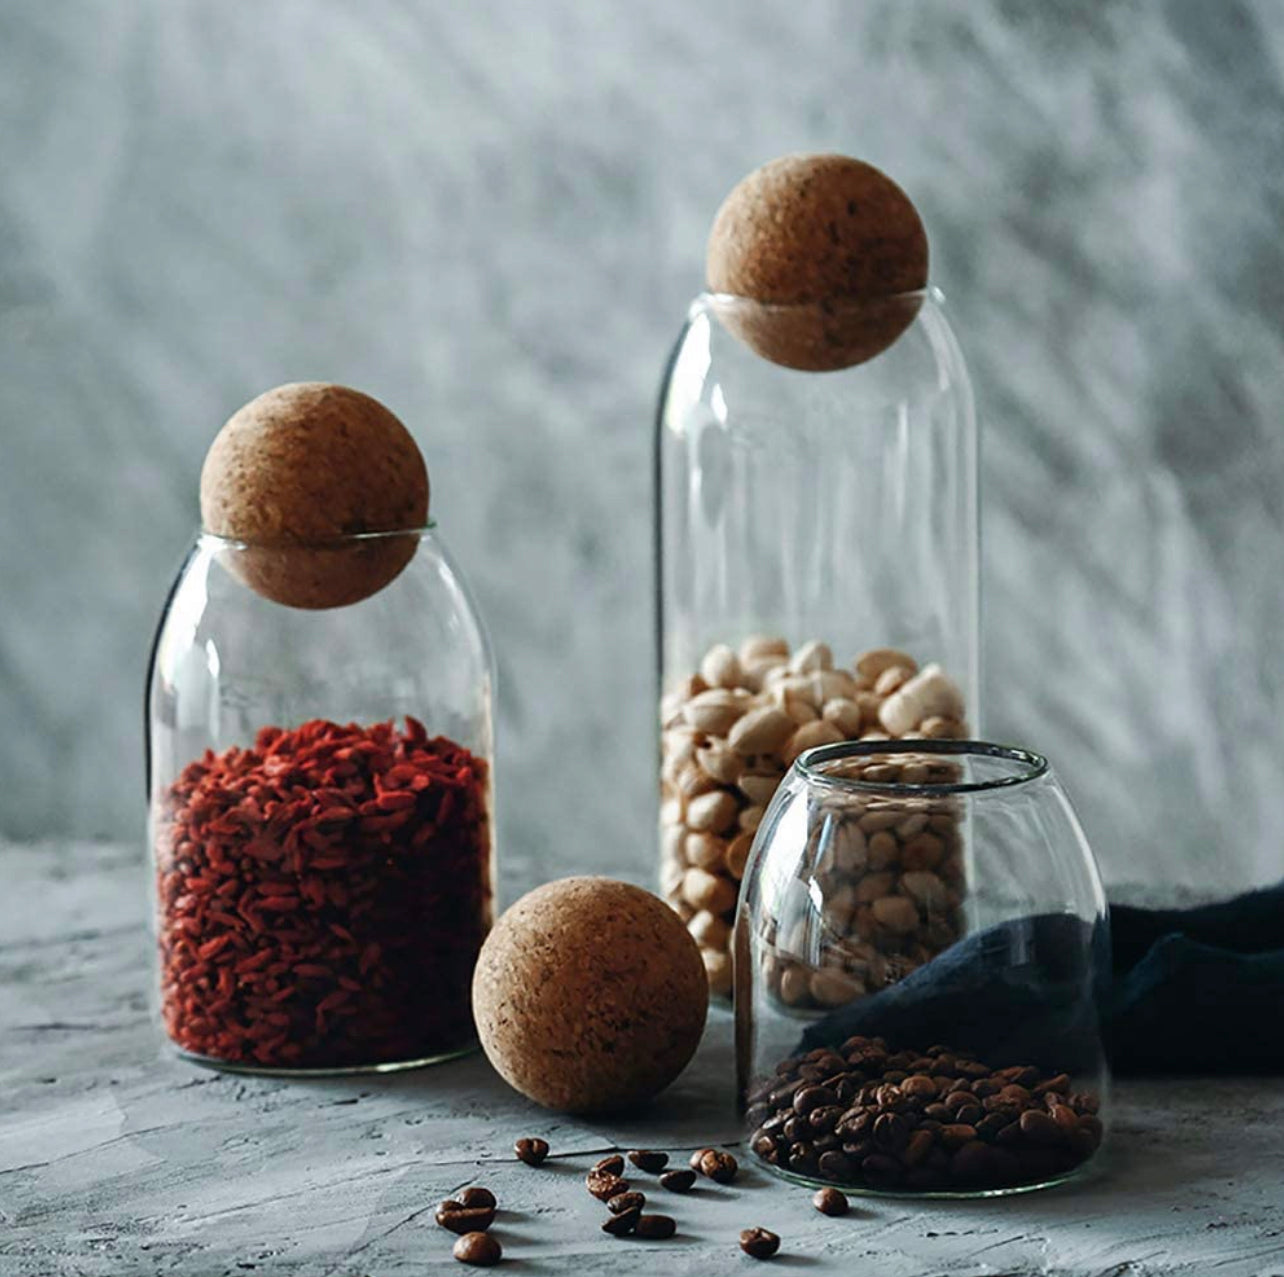 Glass Storage Jars with Cork Ball Lid Set – Shop Our Favorites